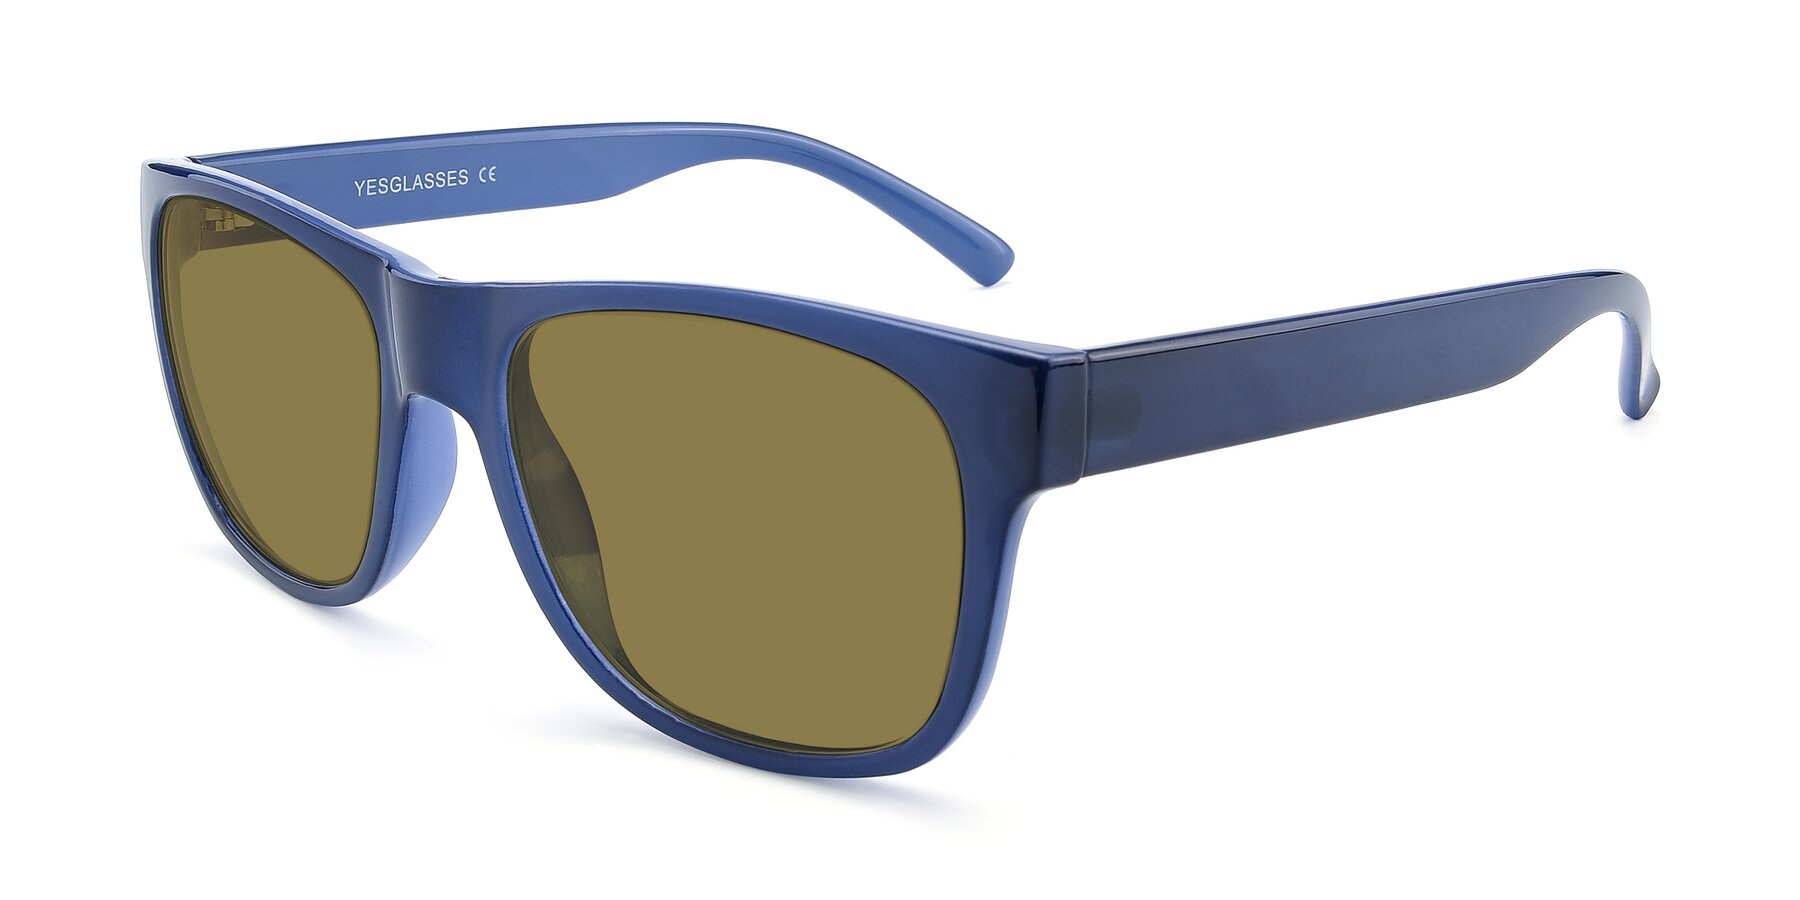 Angle of SSR213 in Blue with Brown Polarized Lenses